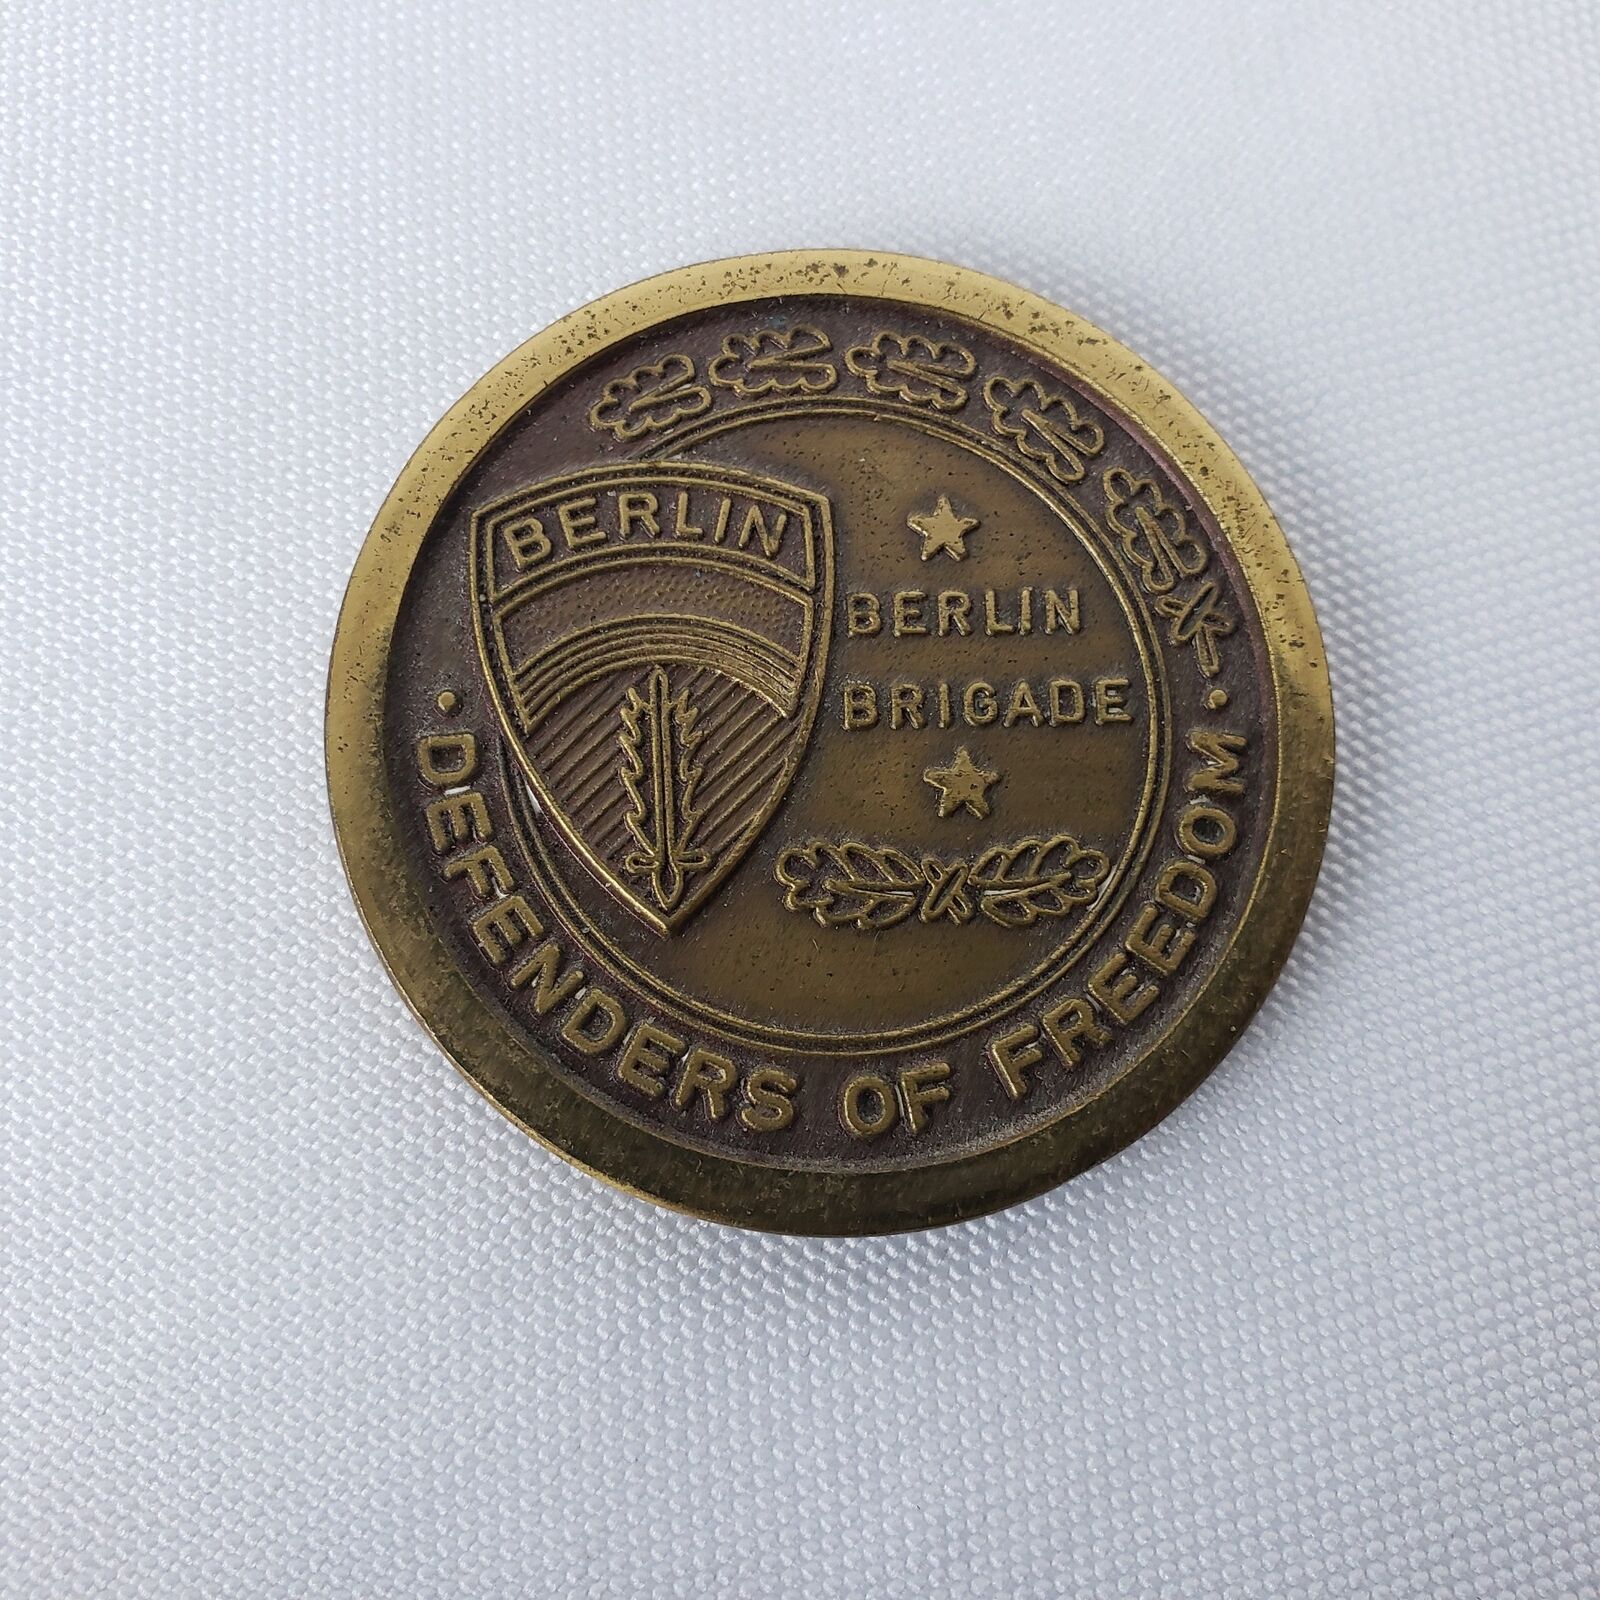 Berlin Brigade Excellence in Marksmanship Army Challenge Coin